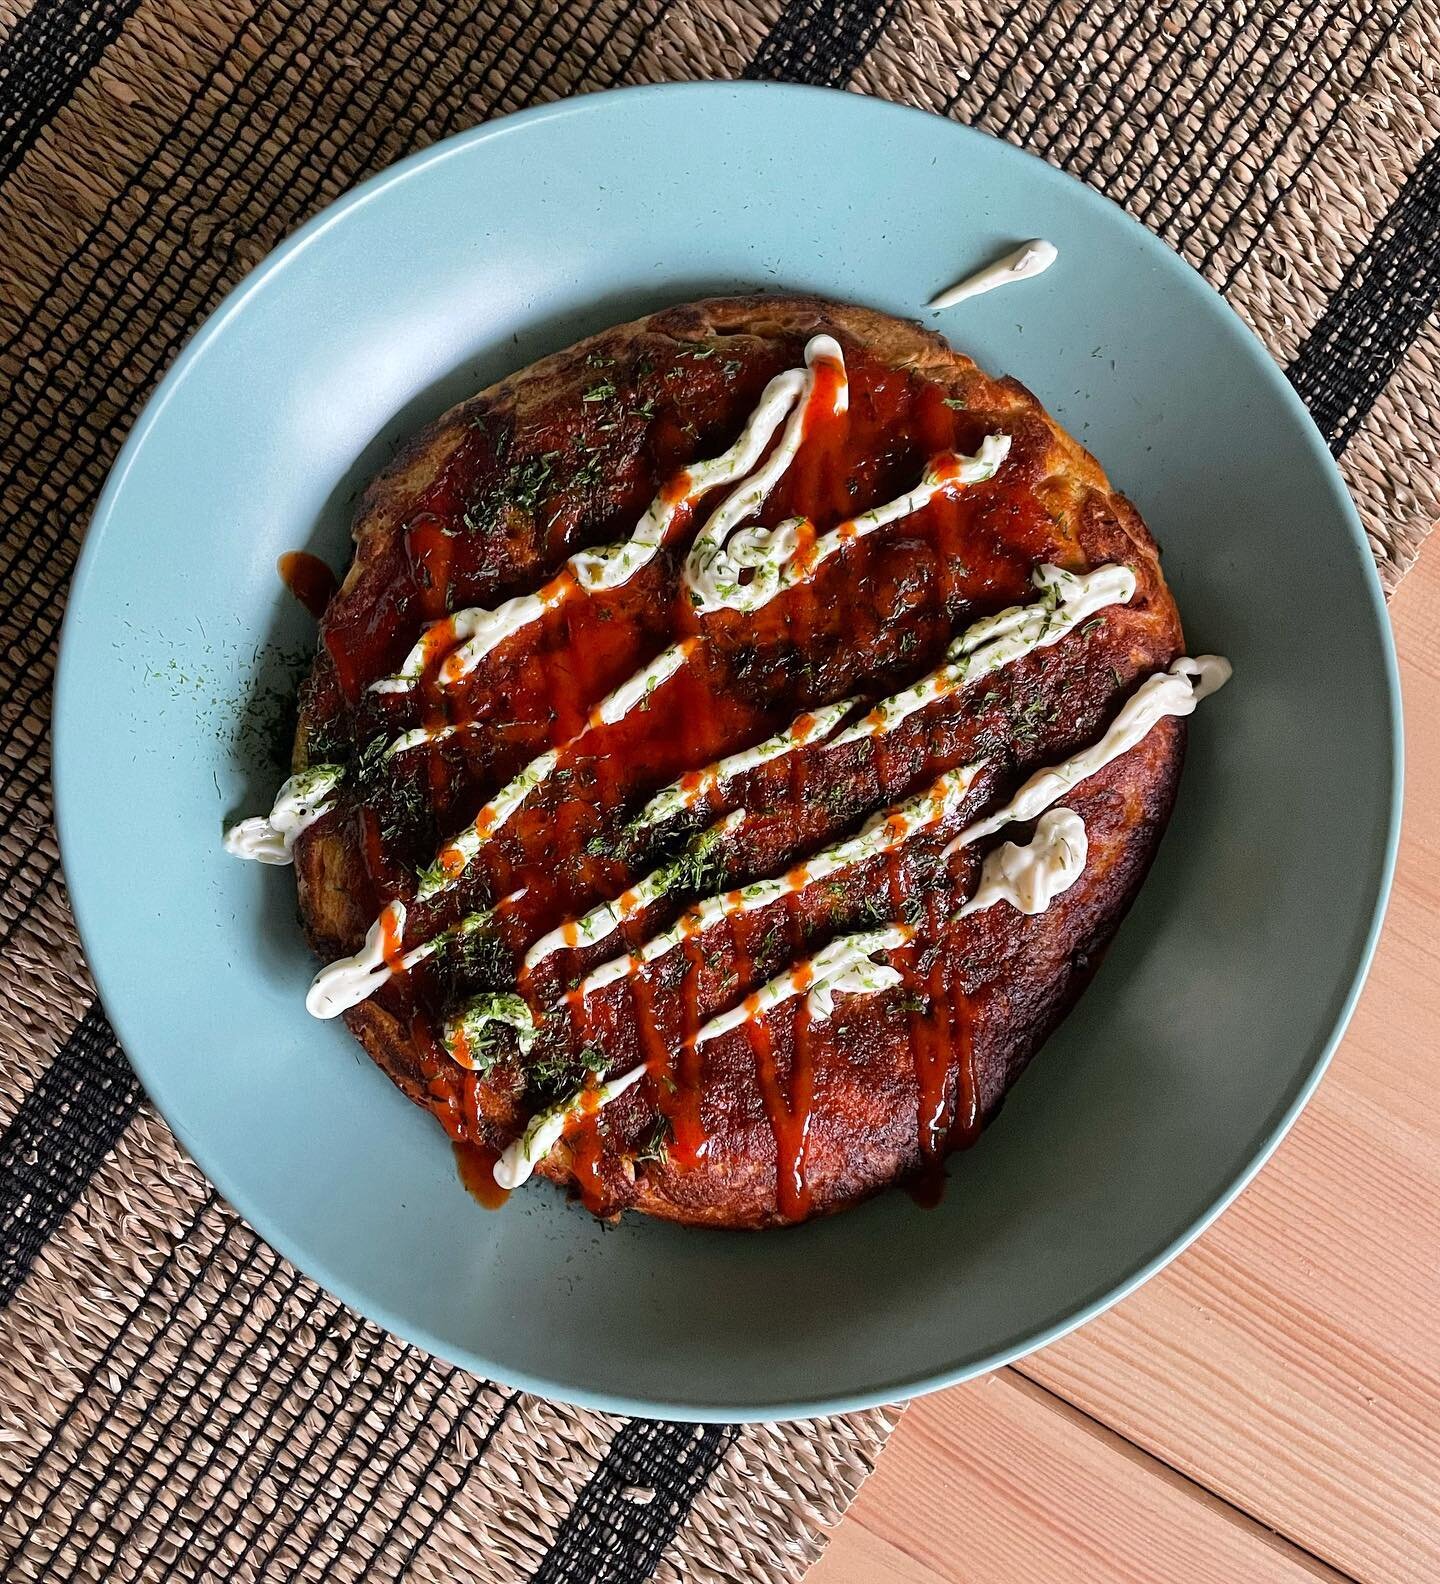 Okonomiyaki is the perfect dish to cook when you need to use up some ingredients from the fridge 

In this case it was a cabbage and carrot spicy slaw plus some ham. Okonomiyaki literally means &ldquo;how you like&rdquo; so there are no rules. 

Some